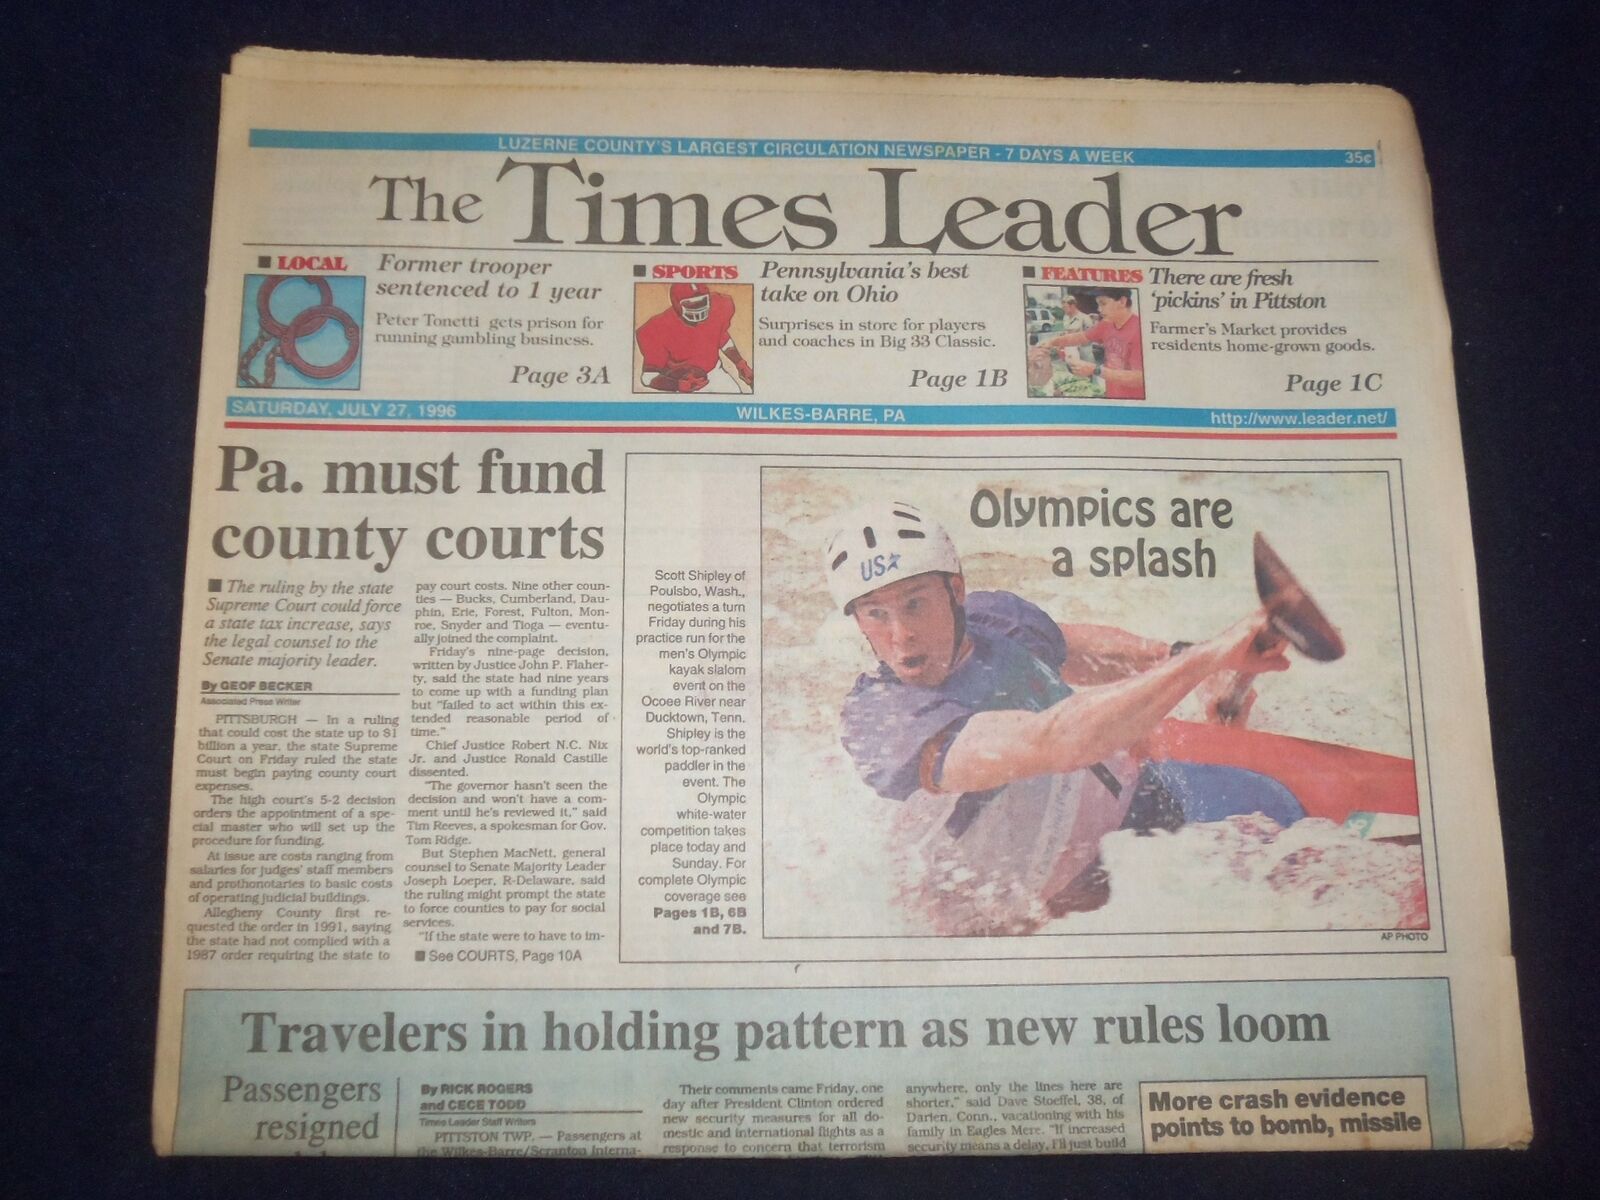 1996 JULY 27 WILKES-BARRE TIMES LEADER - PA MUST FUND COUNTY COURTS - NP 8161